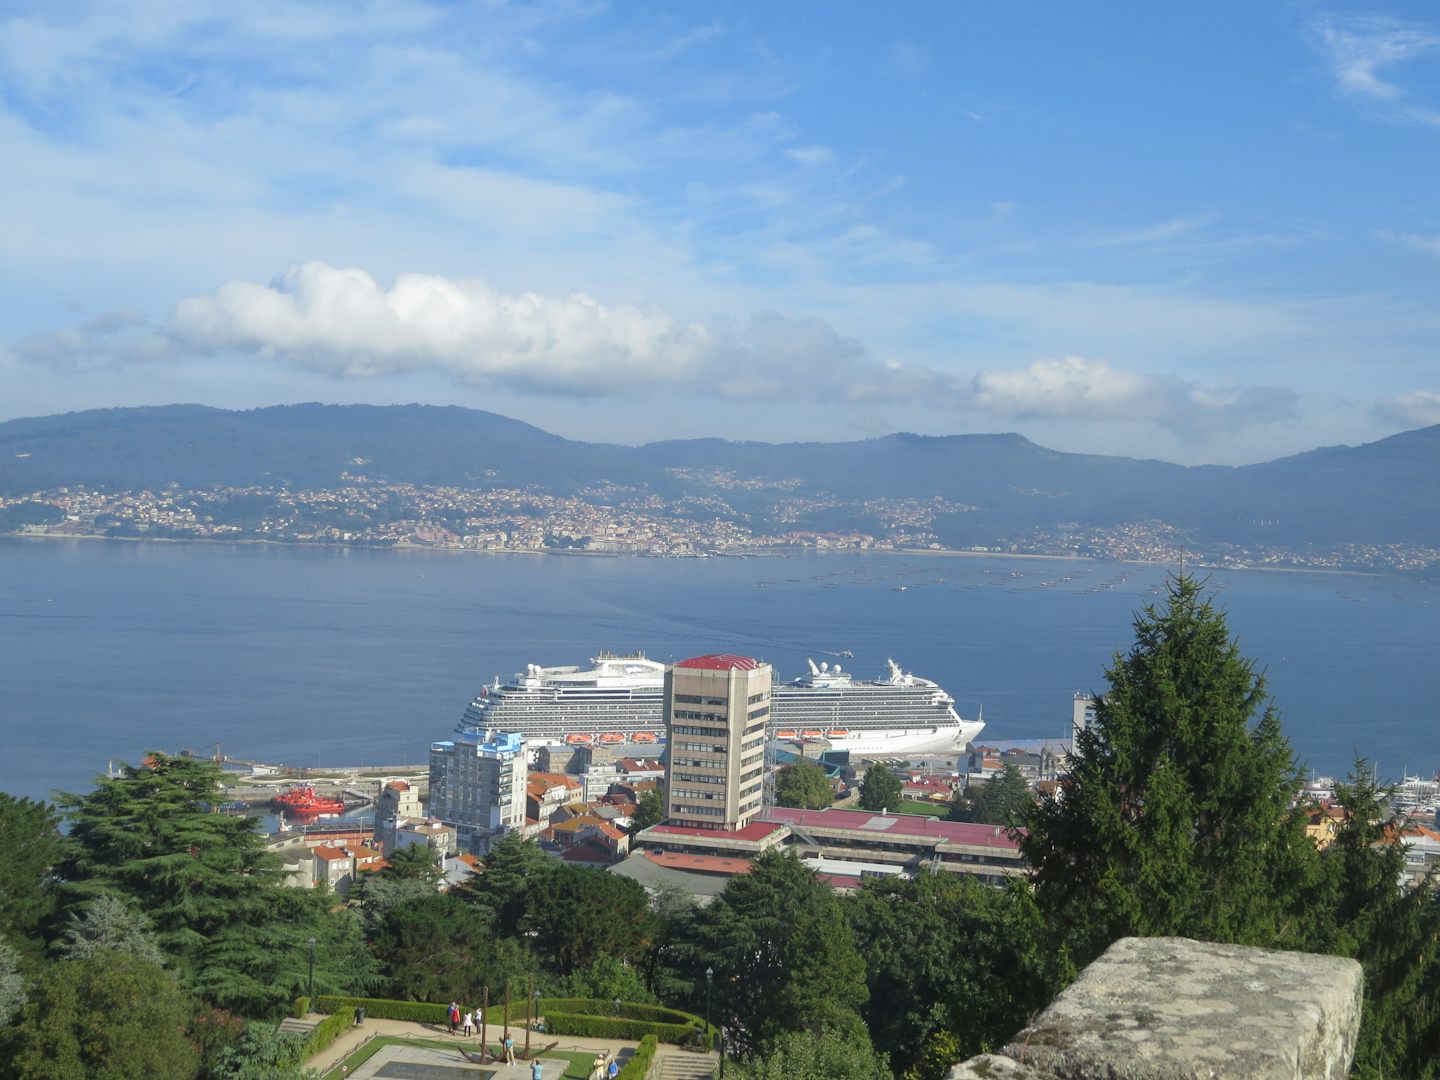 View from top of Castelo Castro, Vigo, Spain with view of our ship